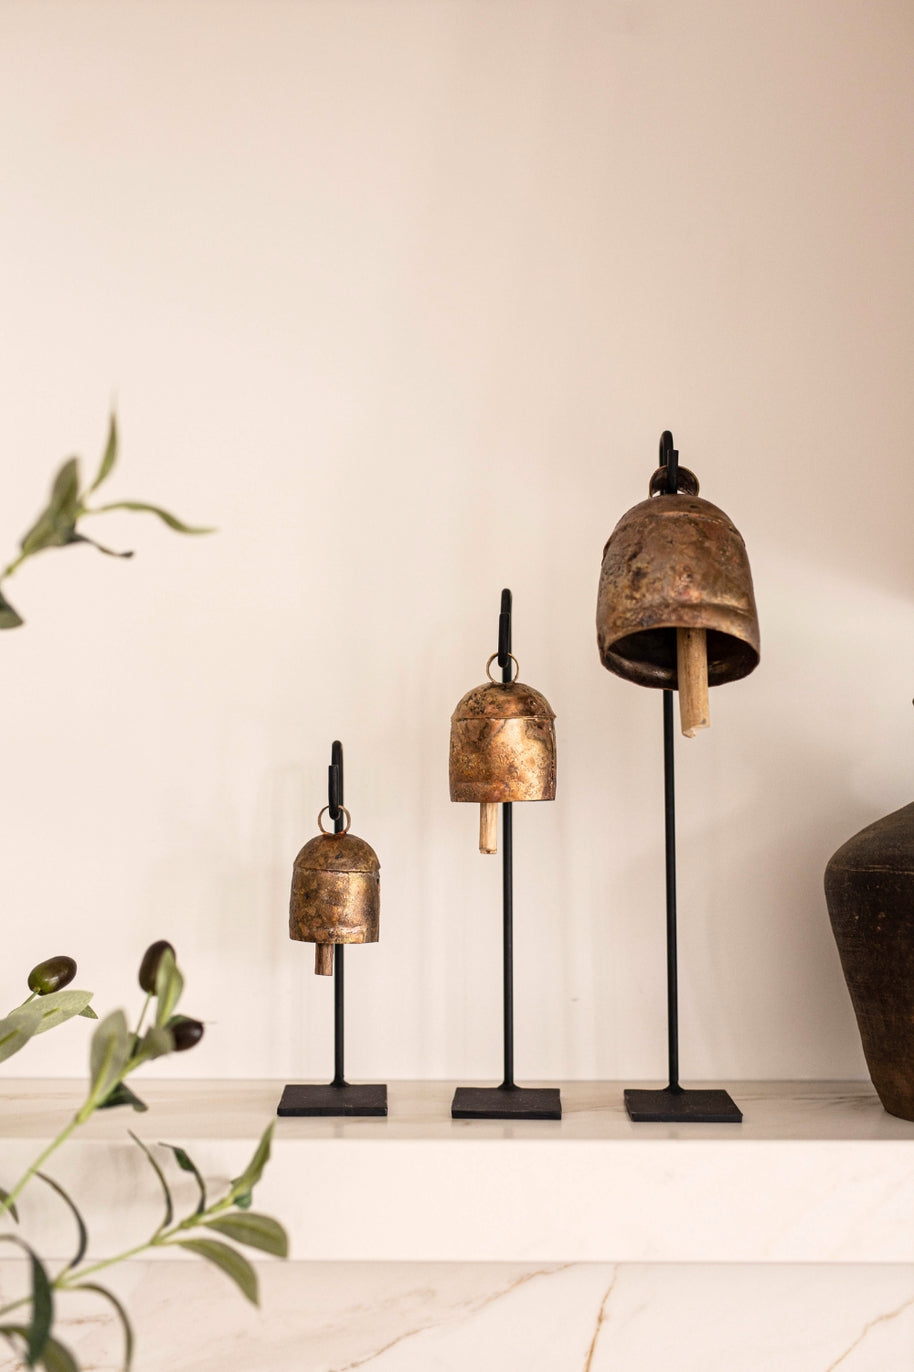 This set of 3 bell stands are crafted from iron and feature welded hooks, creating an artistic and unique display. These copper bells can make a dramatic, decorative statement in any living space.